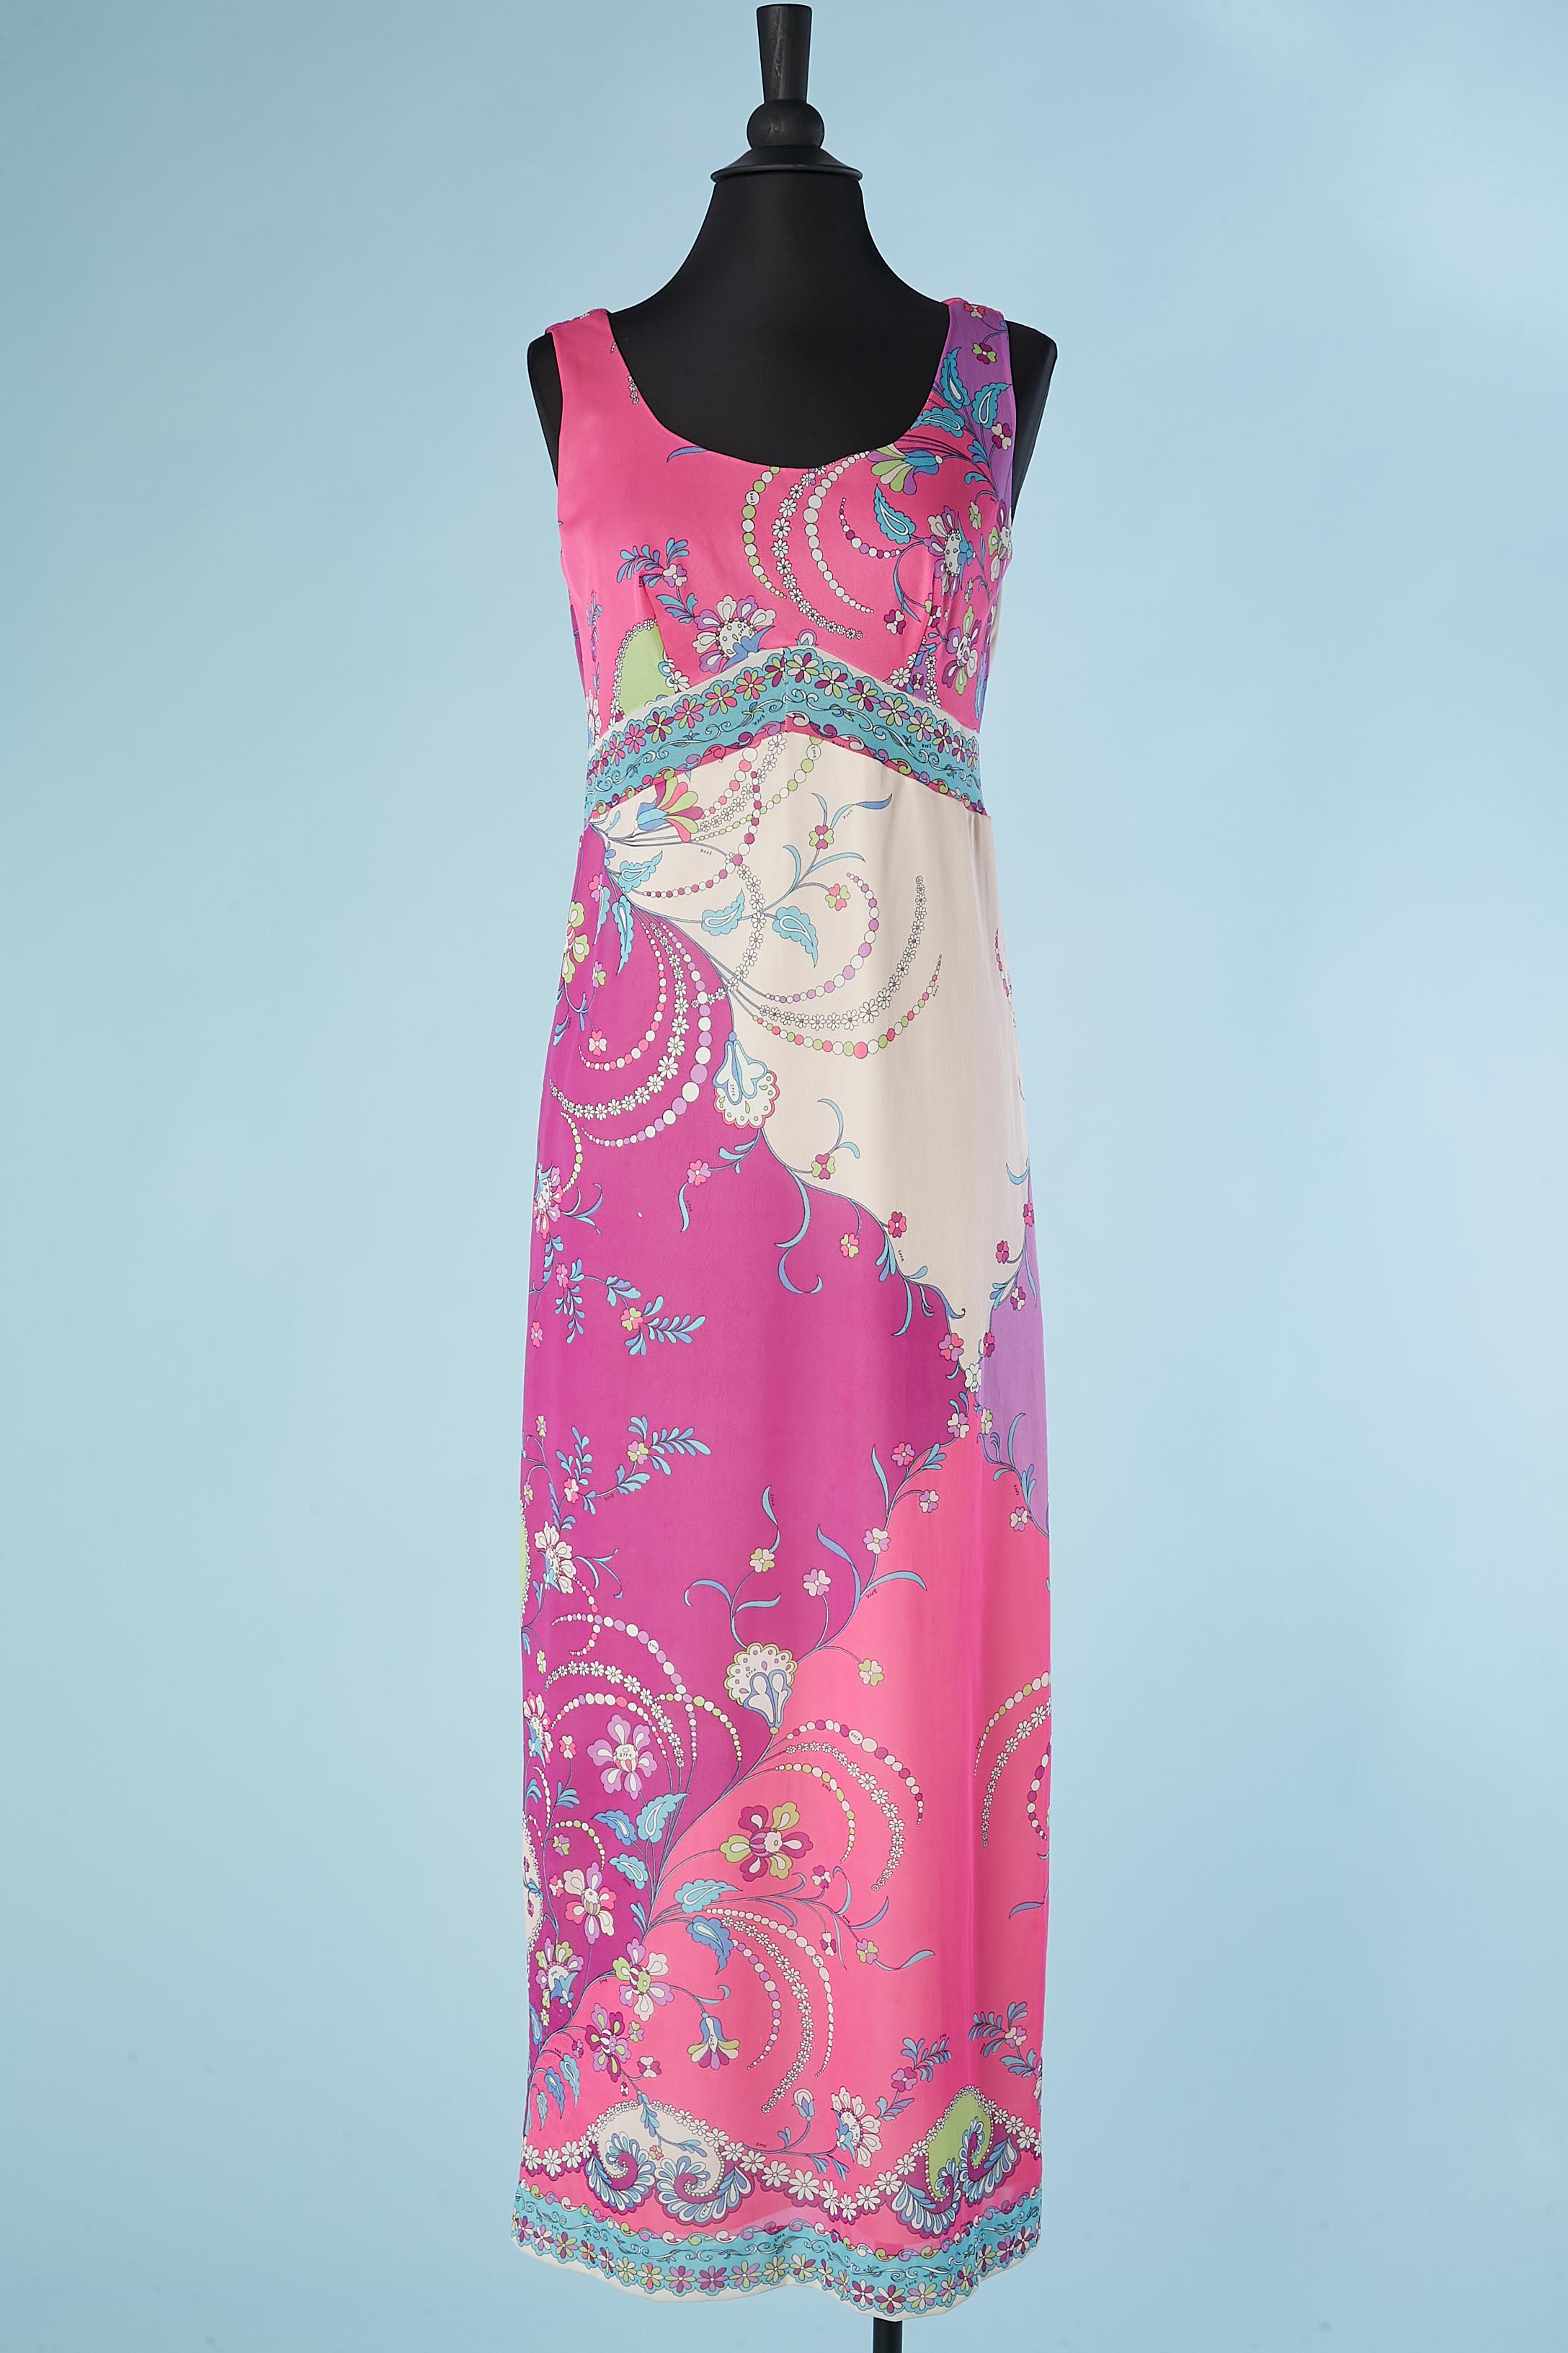 Long sleeveless printed jersey dress. Silk lining. Branded fabric: EPFR ( Emilio Pucci for Formfit Rodgers)
SIZE S